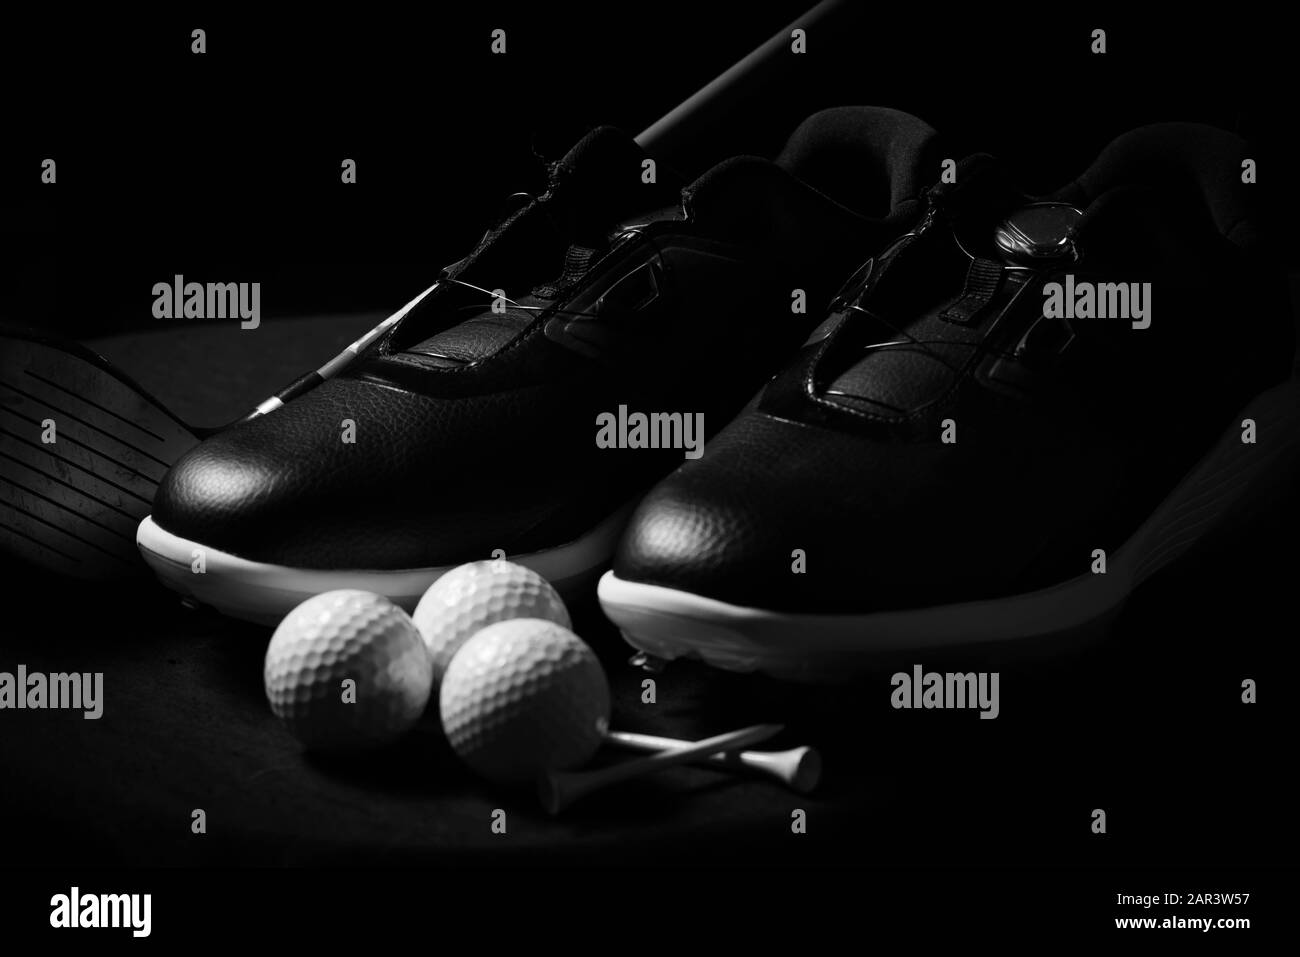 Golf tees Black and White Stock Photos & Images - Alamy